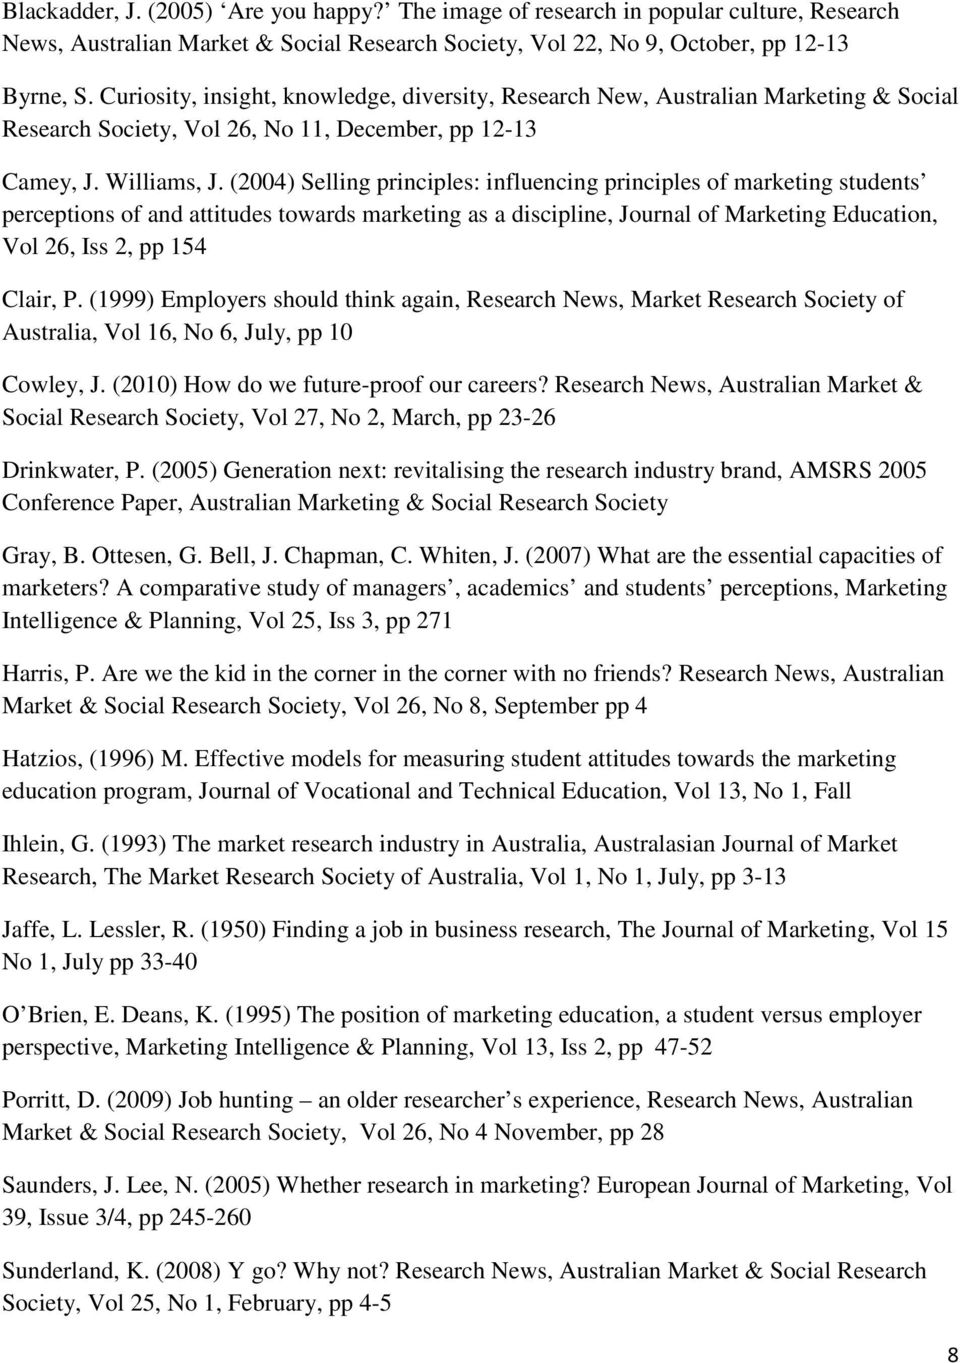 (2004) Selling principles: influencing principles of marketing students perceptions of and attitudes towards marketing as a discipline, Journal of Marketing Education, Vol 26, Iss 2, pp 154 Clair, P.